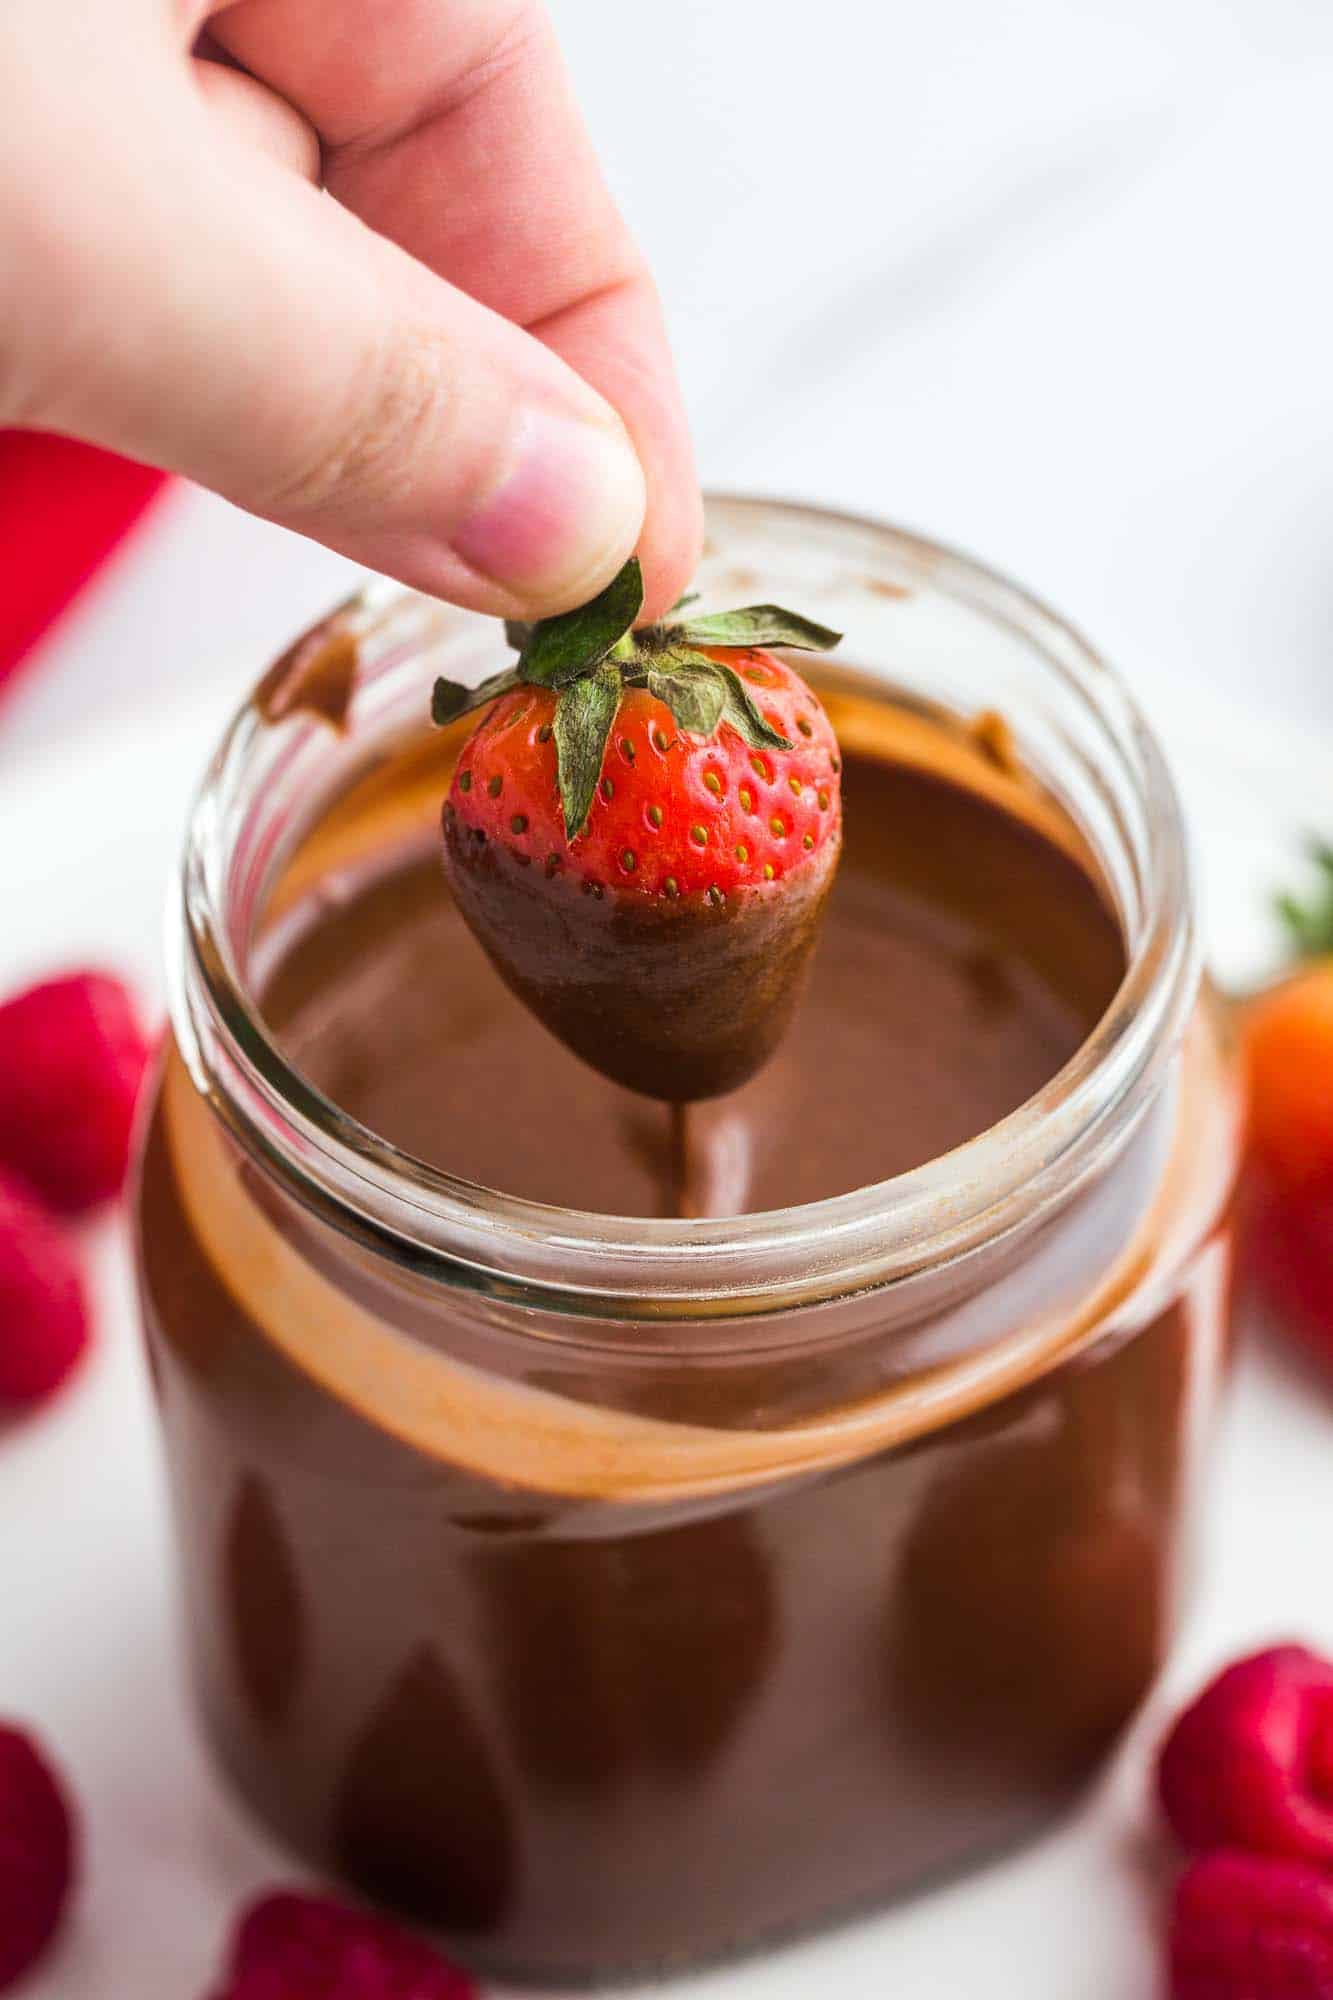 Dipping a fresh strawberry in homemade nutella